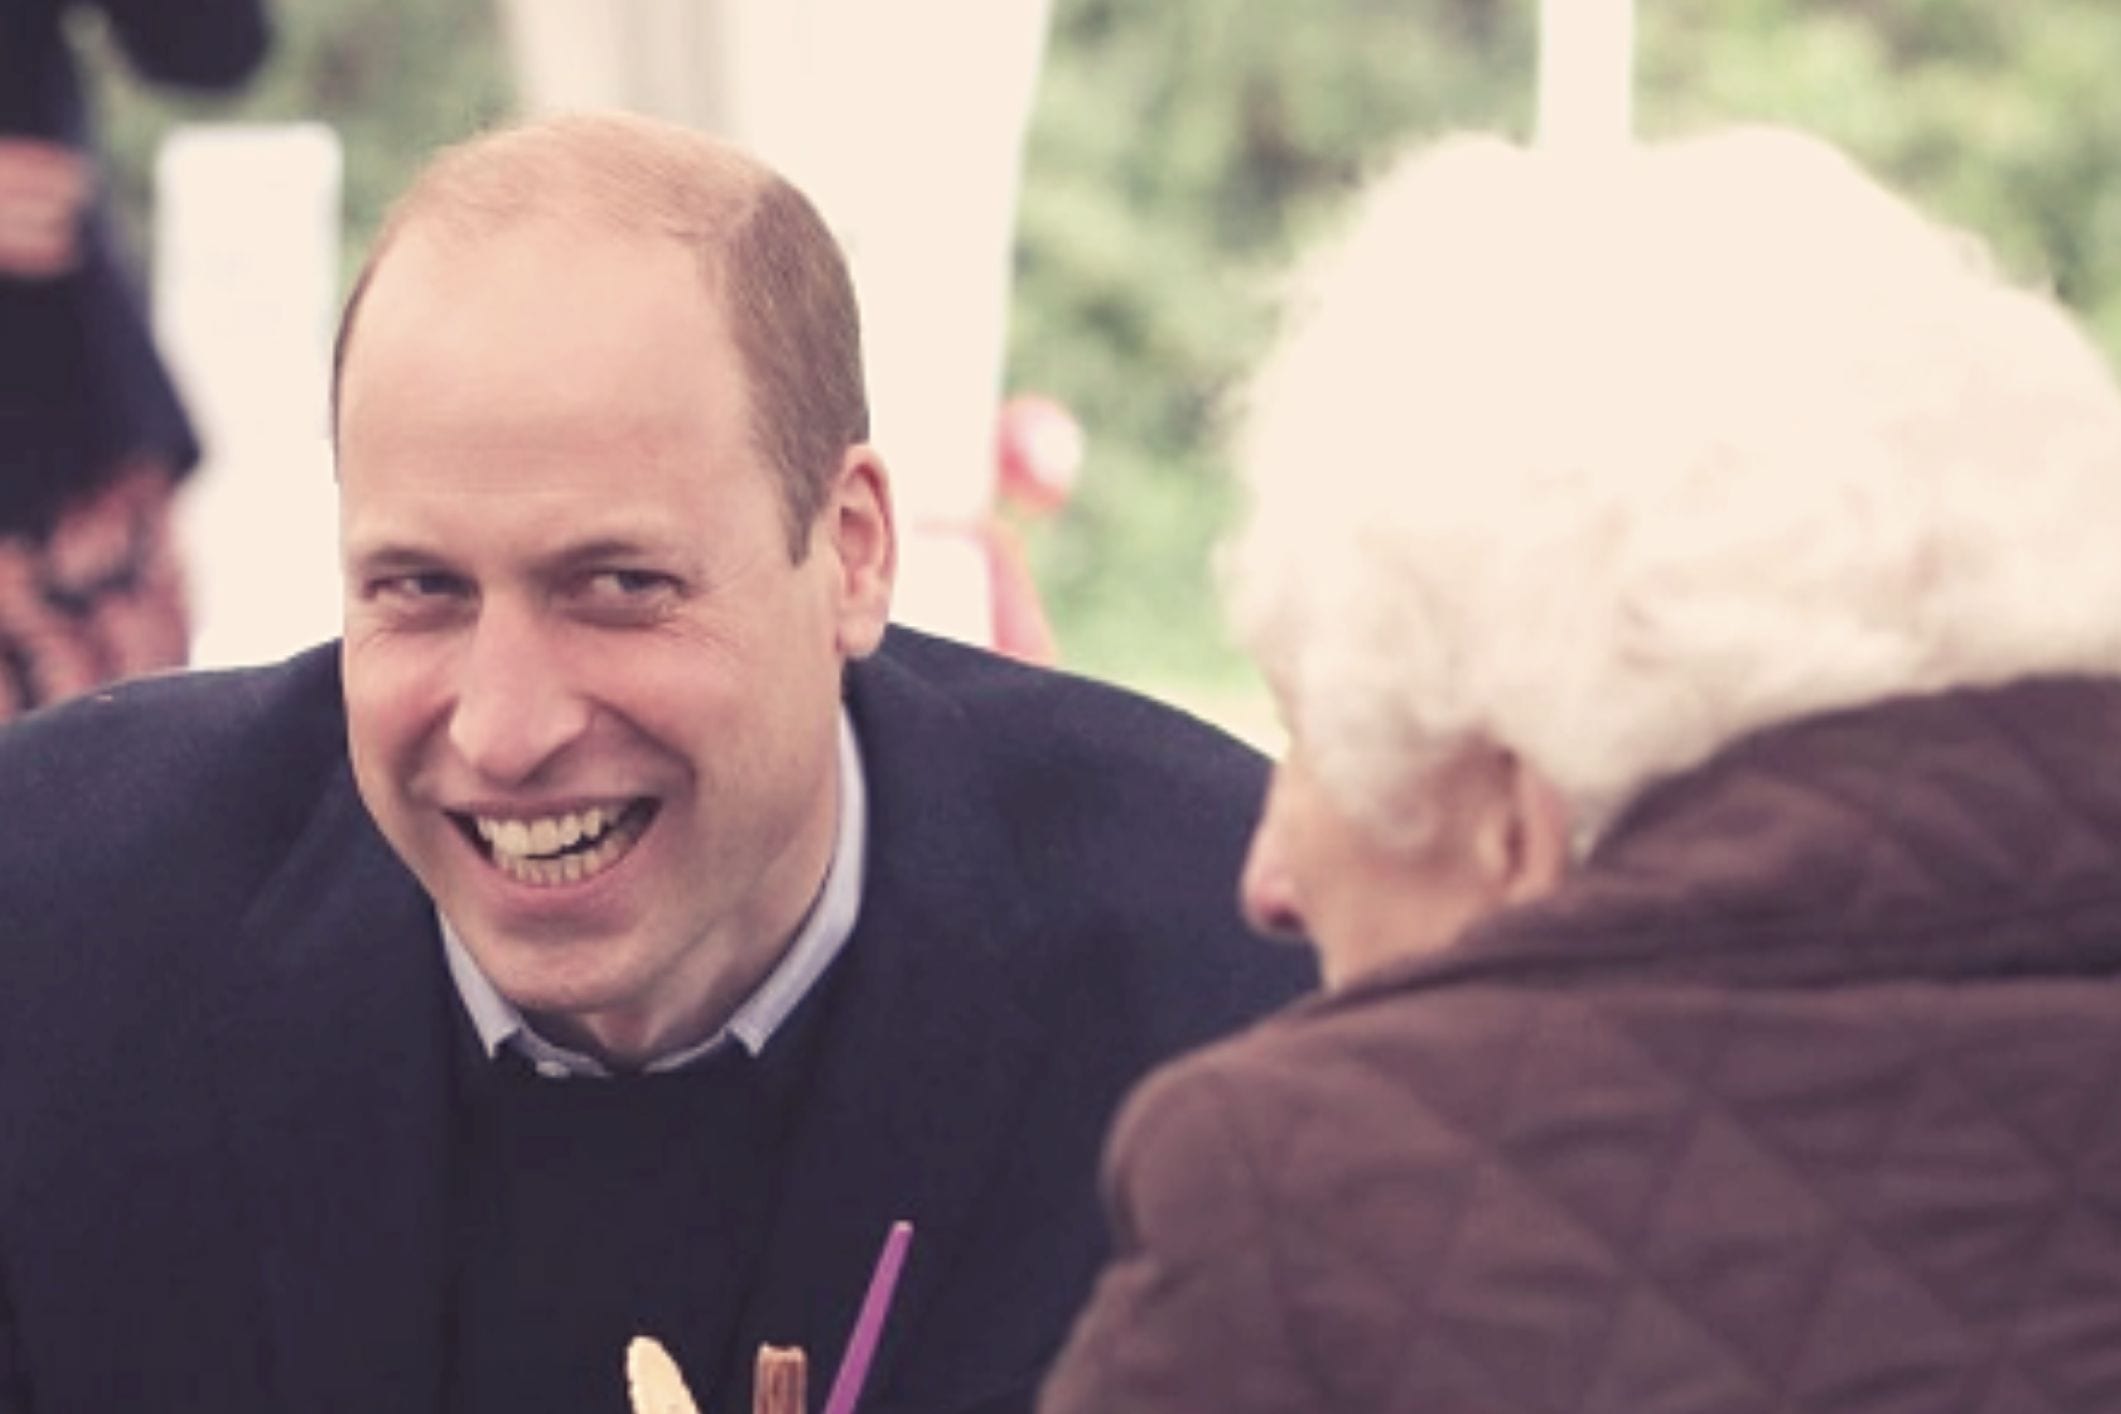 Prince William flirting aged care resident